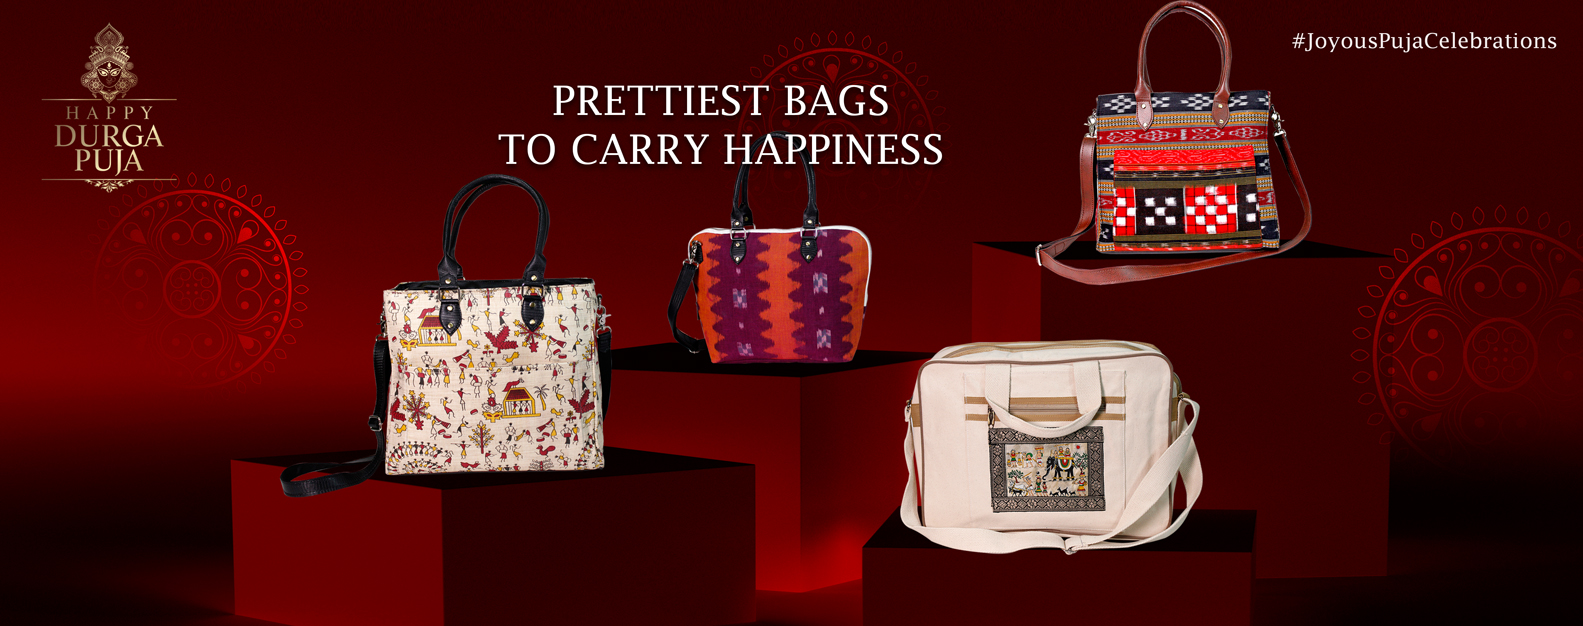 Happy Durga Puja - Bags to Carry